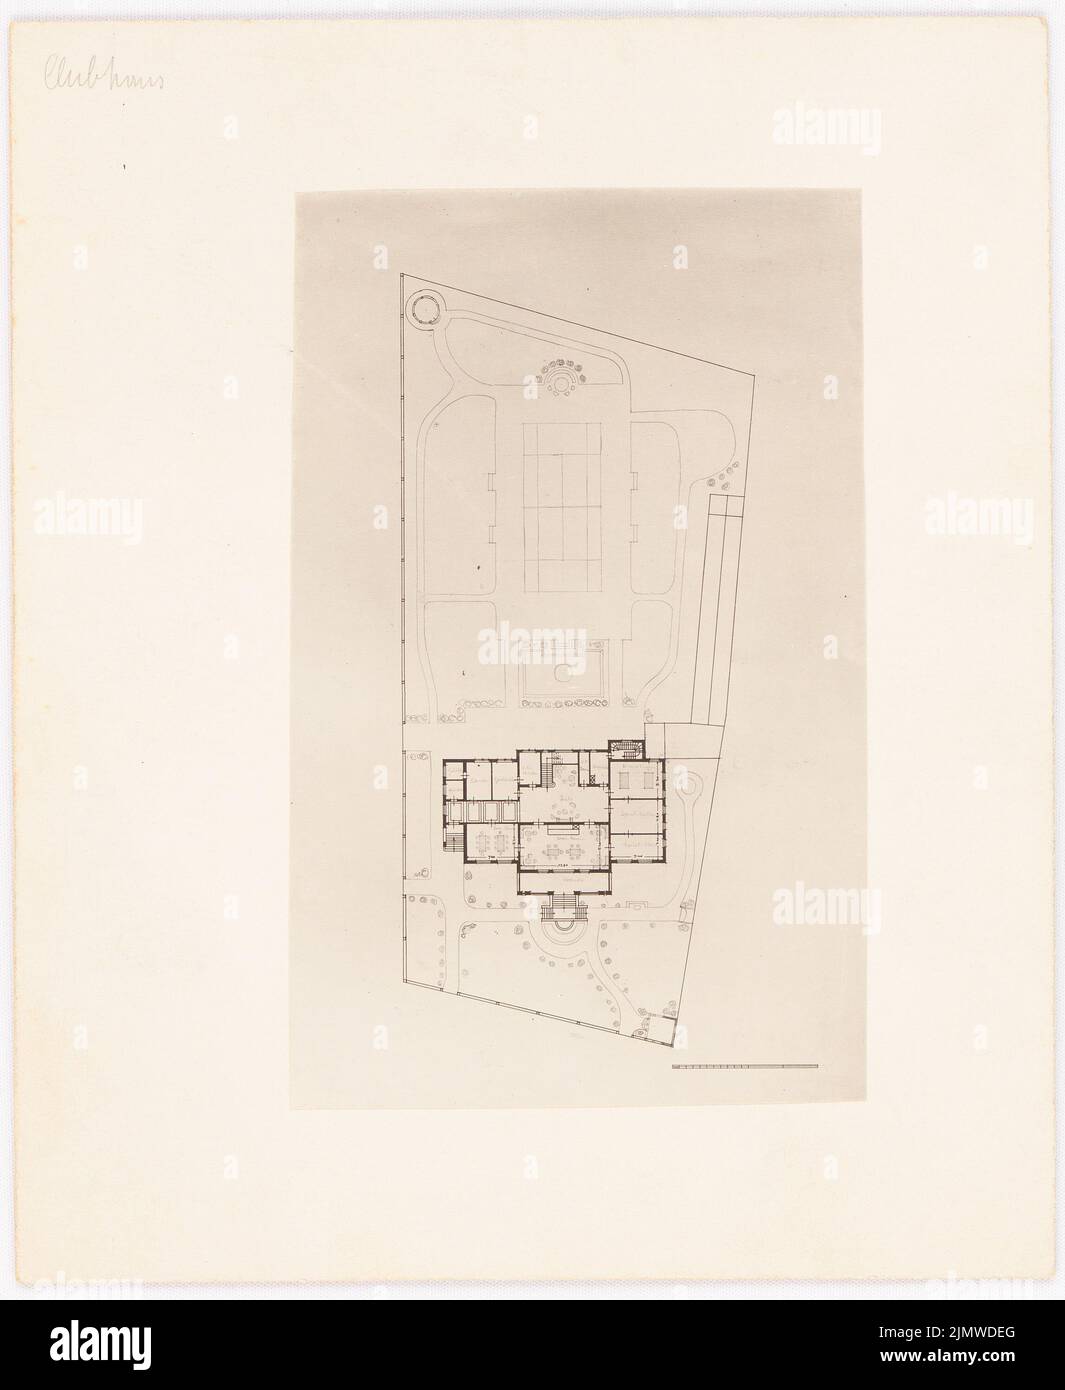 Michel Paul sen. (1877-1938), clubhouse (without date): site plan, scale bar. Photo on paper, 23.7 x 19.4 cm (including scan edges) Michel Paul sen.  (1877-1938): Klubhaus Stock Photo